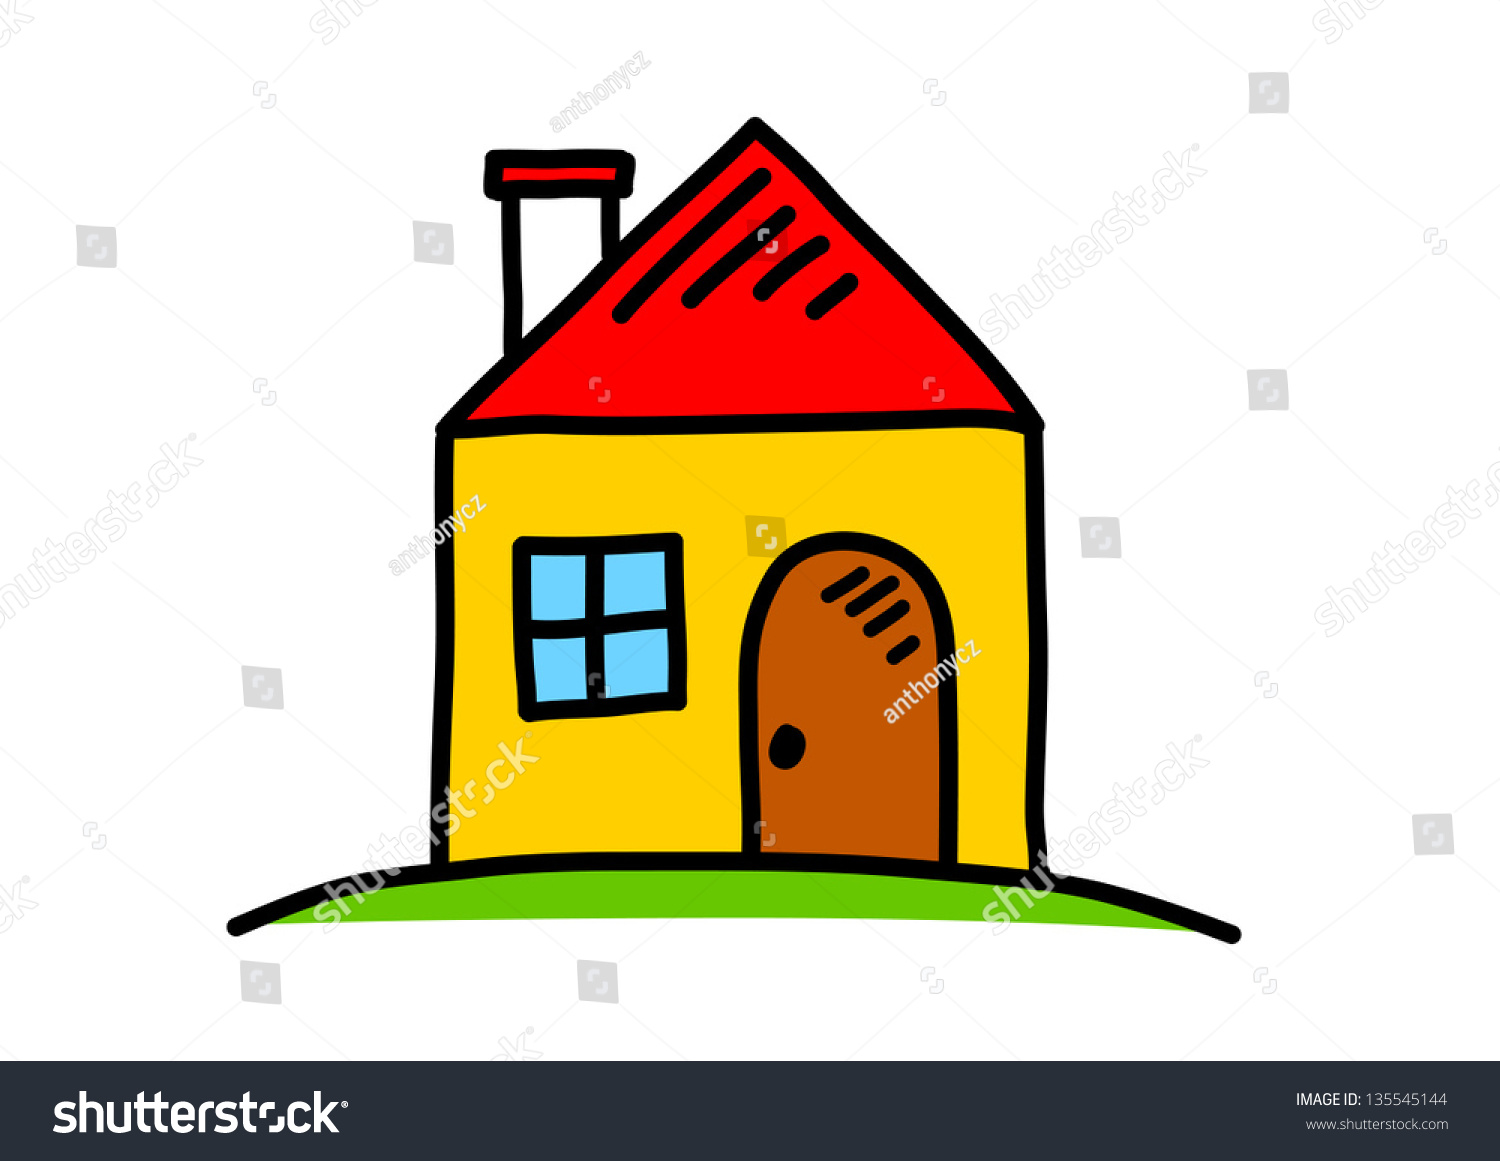 House Drawing Stock Vector 135545144 - Shutterstock